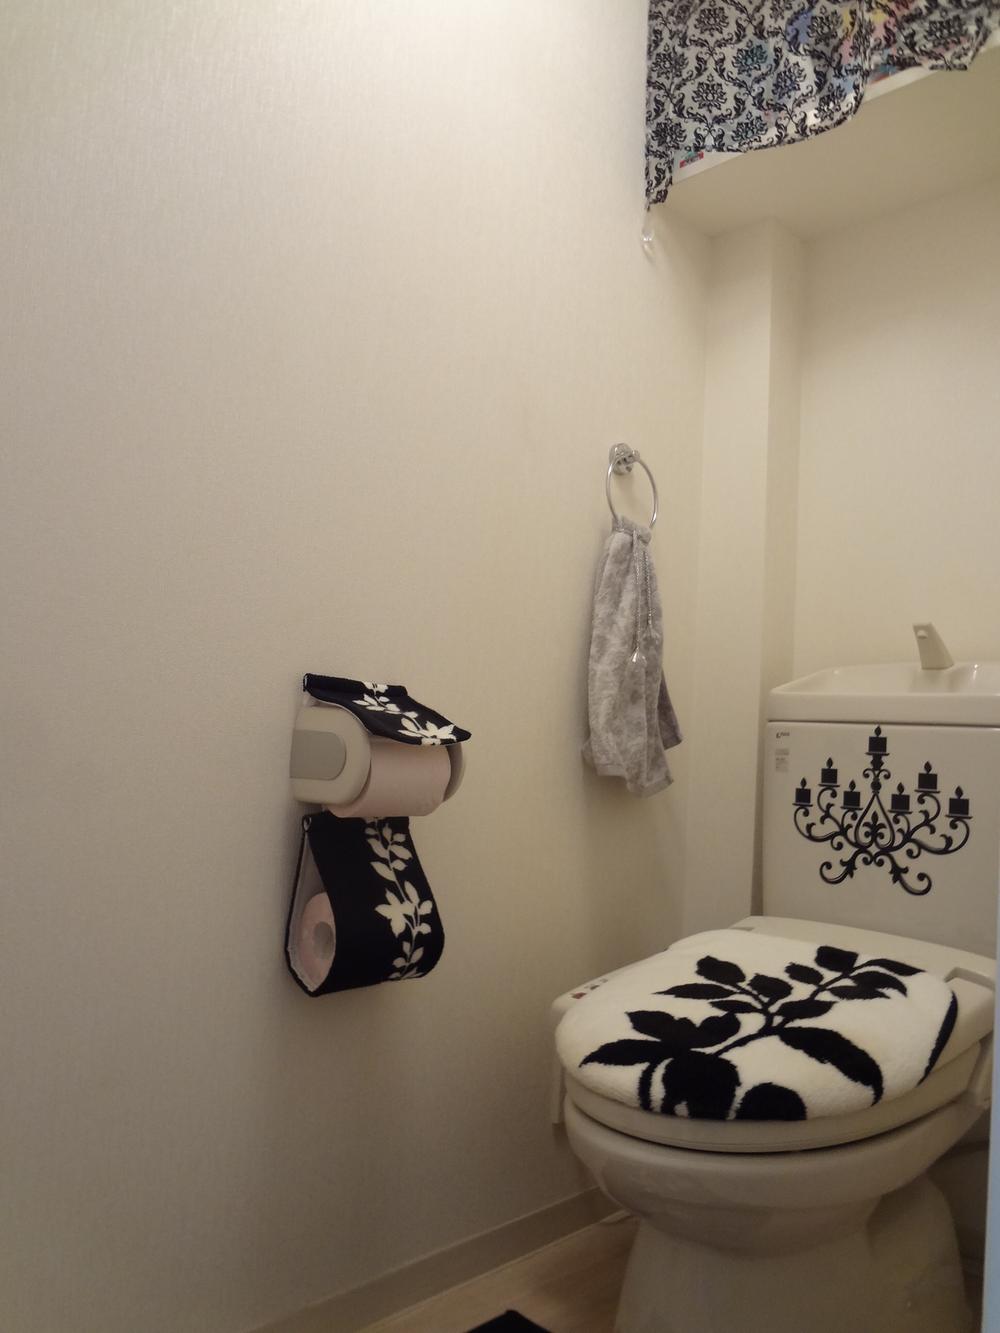 Toilet. It is the room very clean your. (December 2013 shooting)